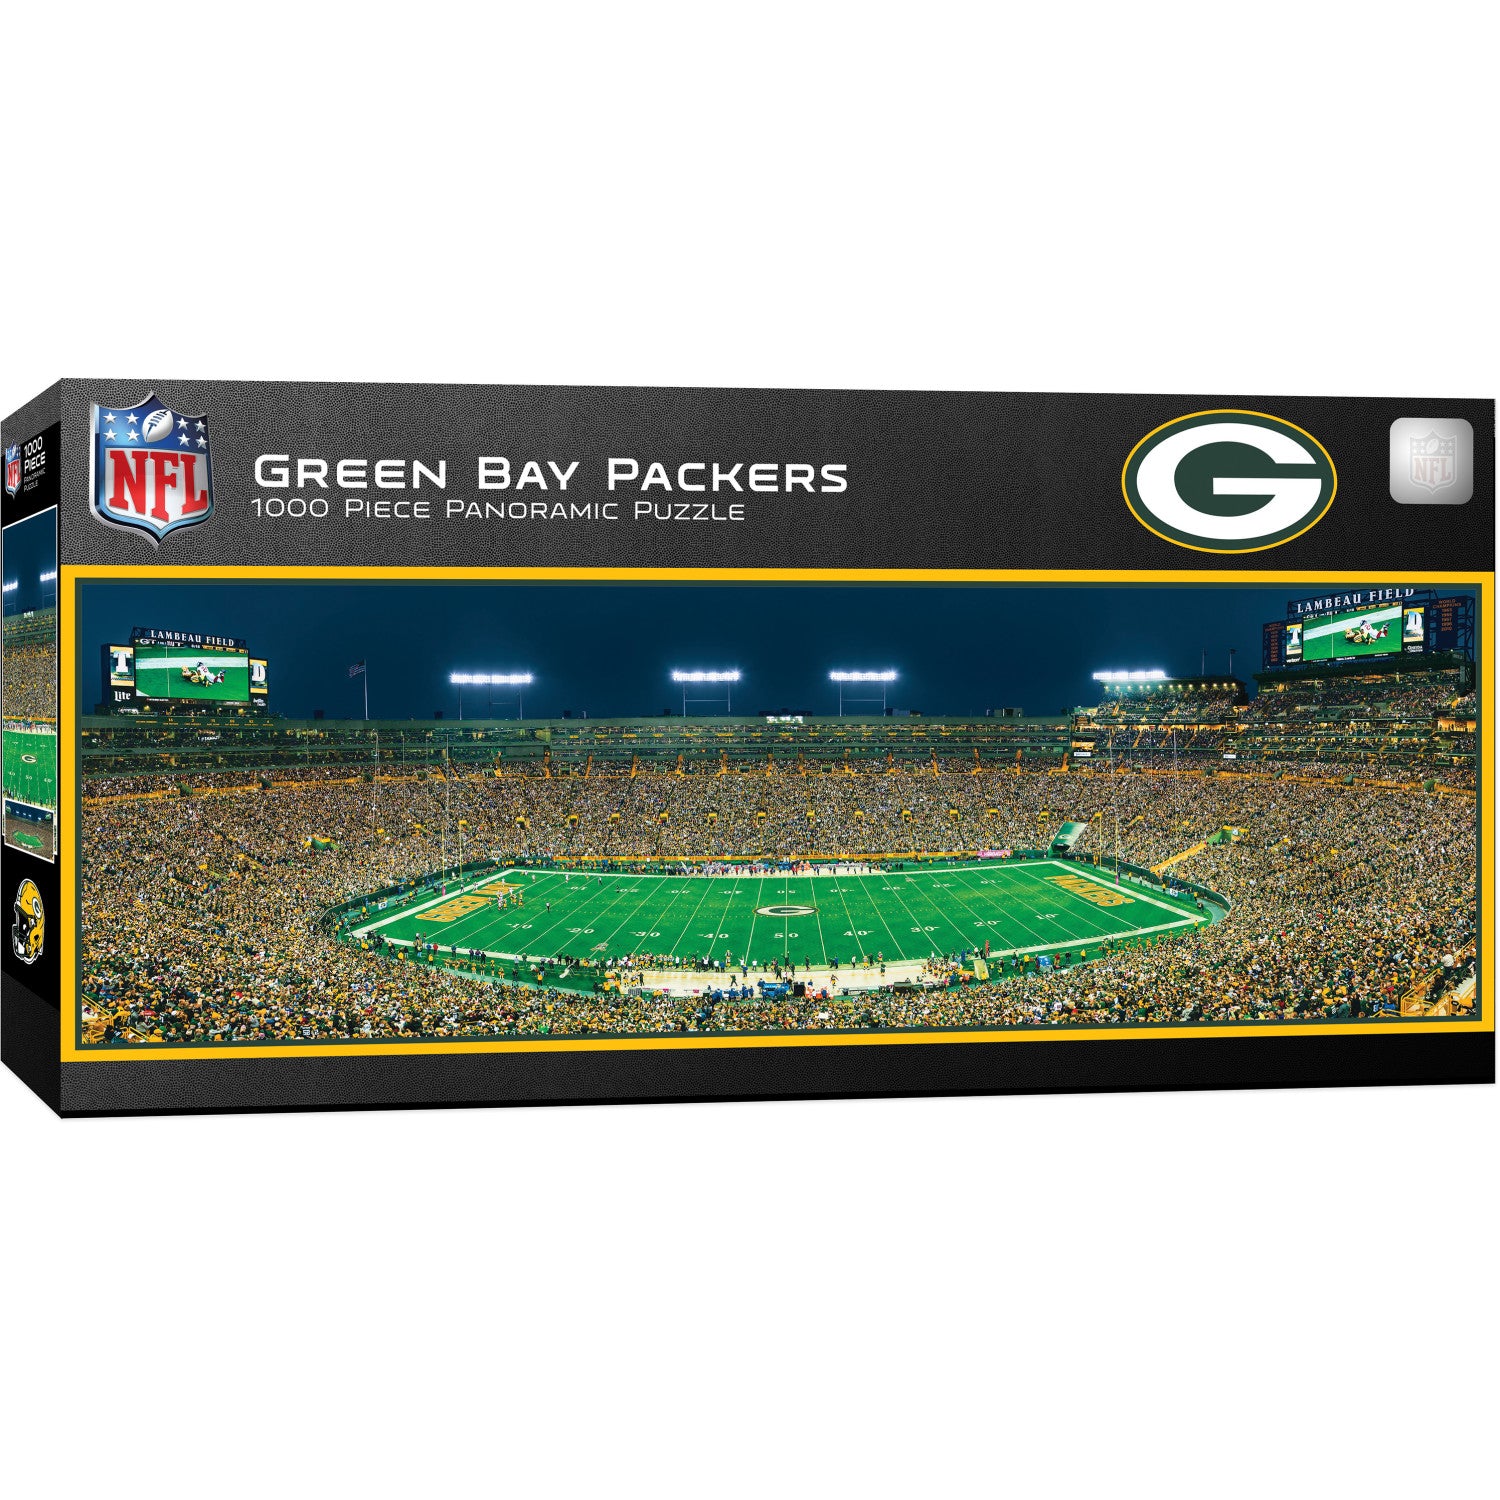 Green Bay Packers - 1000 Piece Panoramic Jigsaw Puzzle - Center View